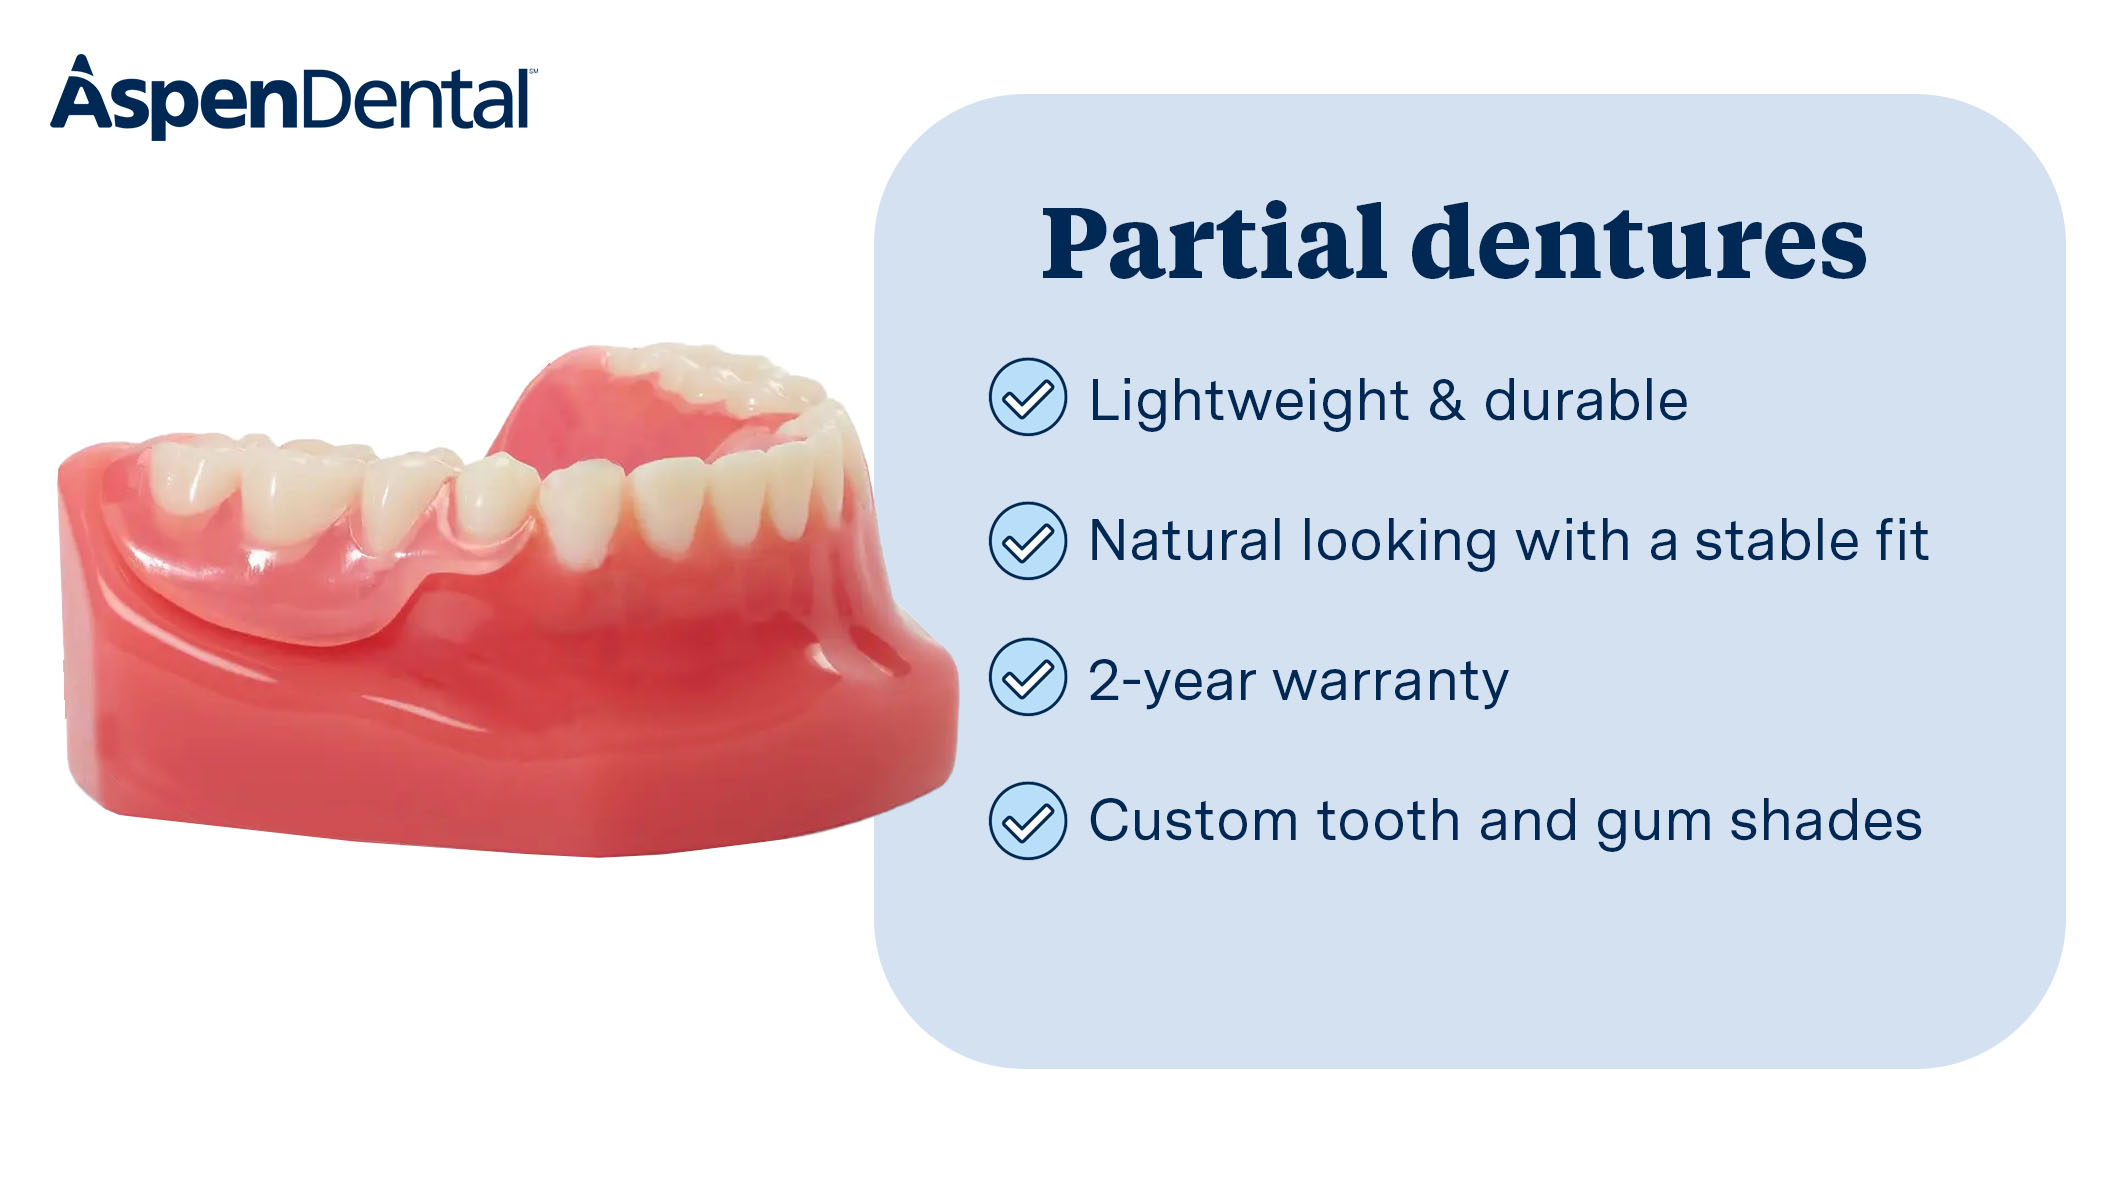 Restore your smile with our customizable partial dentures. Lightweight, durable, natural-looking, an Aspen Dental - Glen Burnie, MD Glen Burnie (443)713-4034